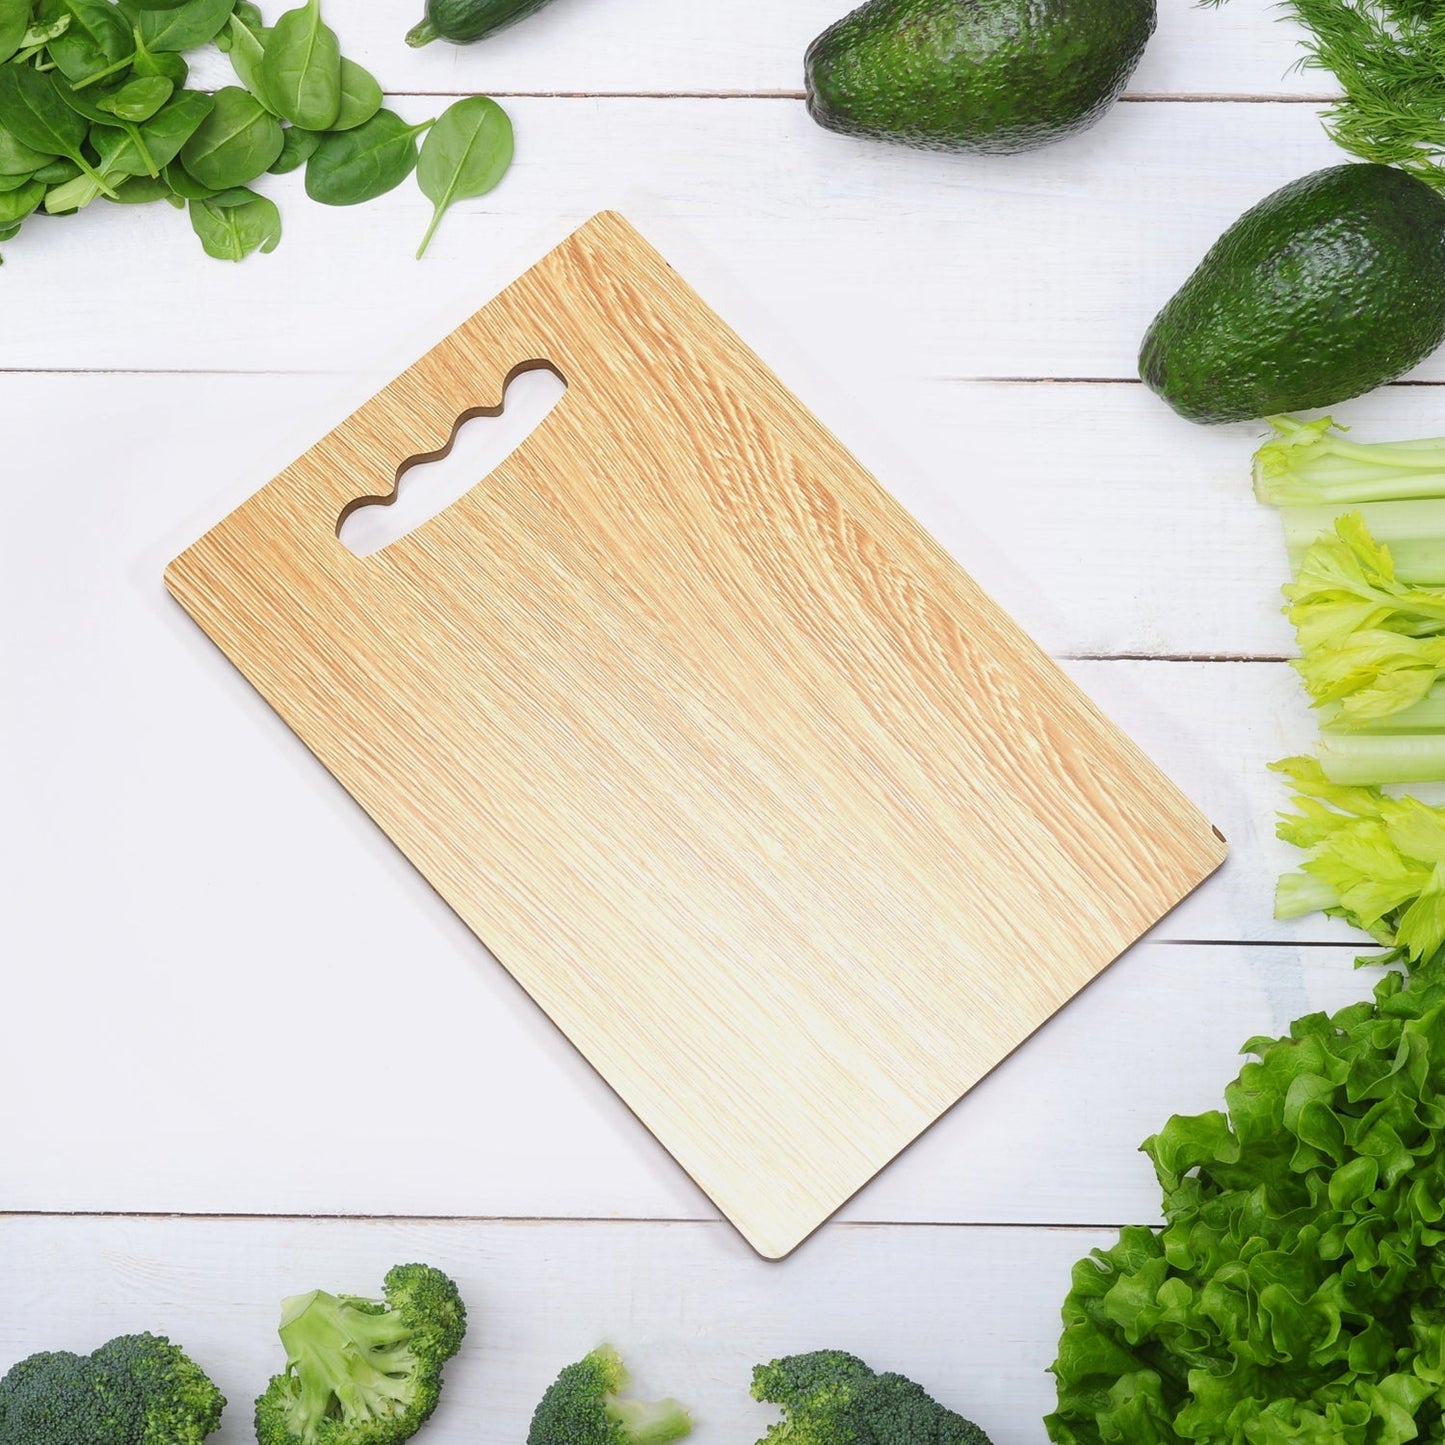 7122 Wooden Chopping Board For Vegetable Cutting & Kitchen Use DeoDap